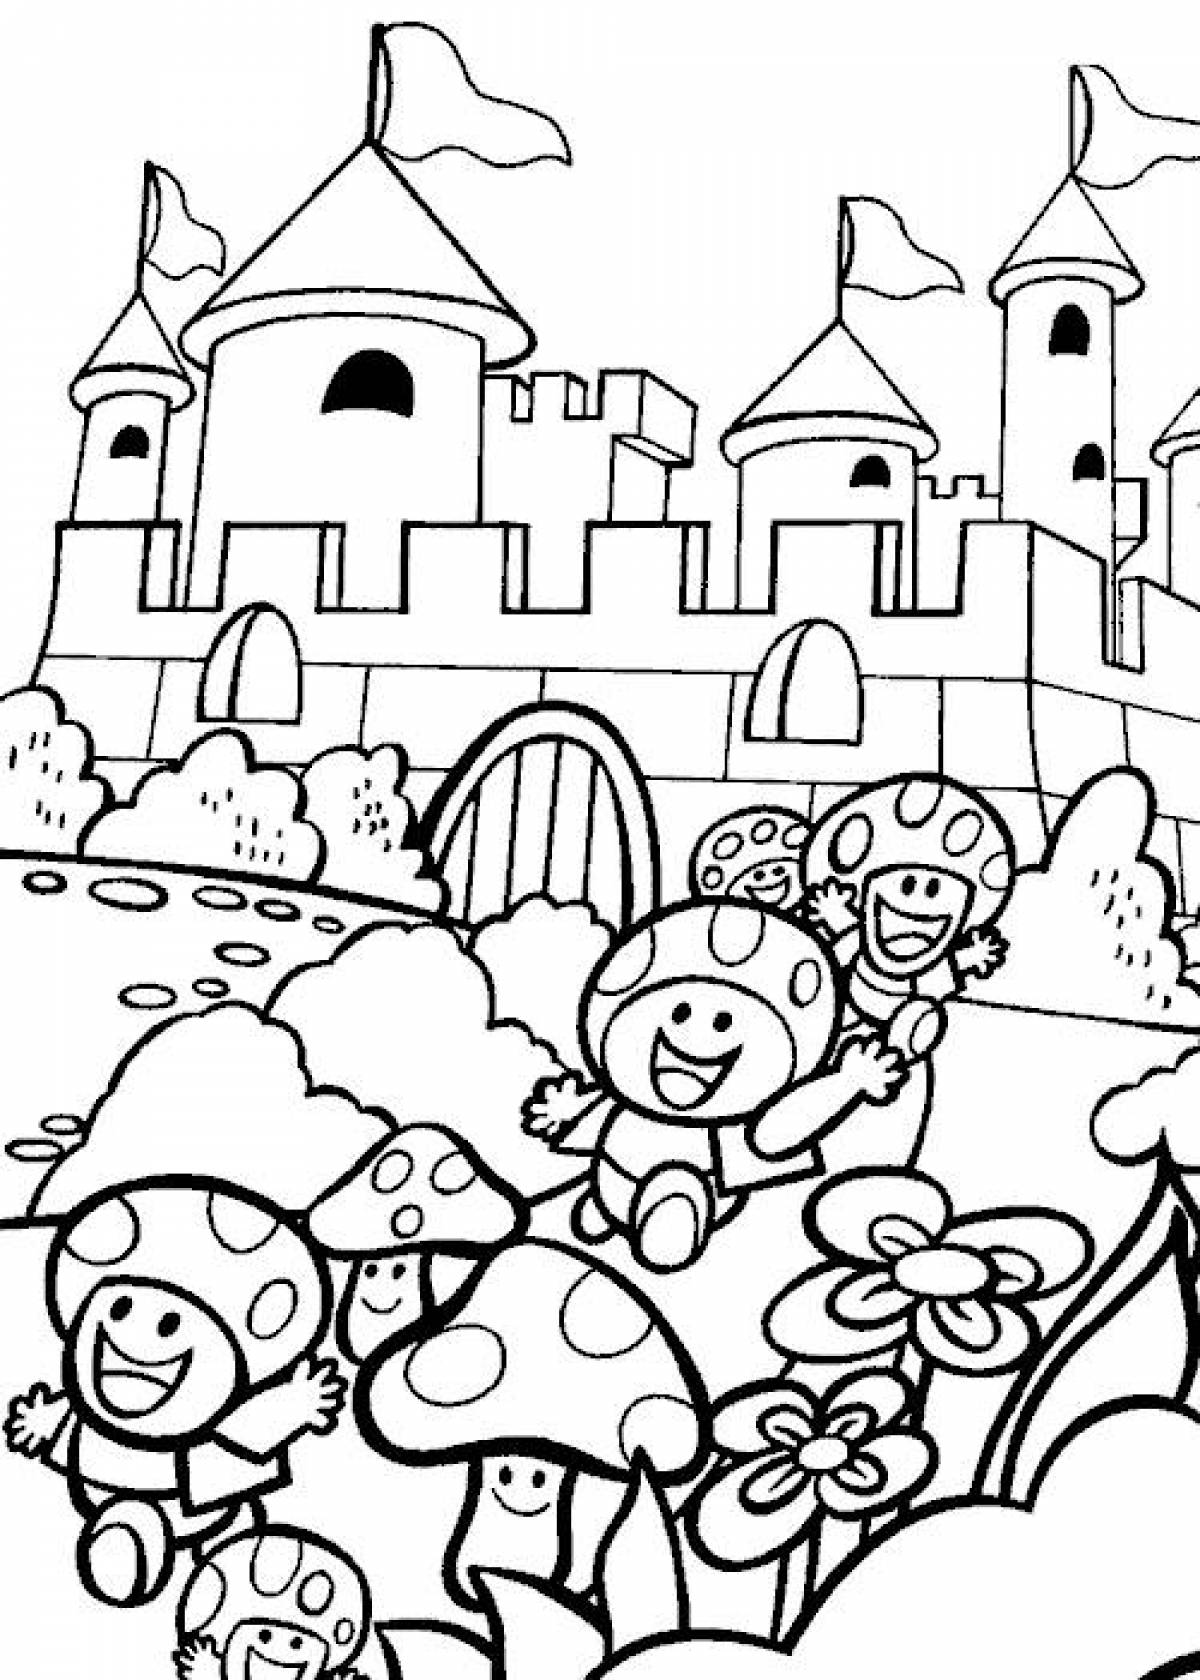 Mario coloring pages printable